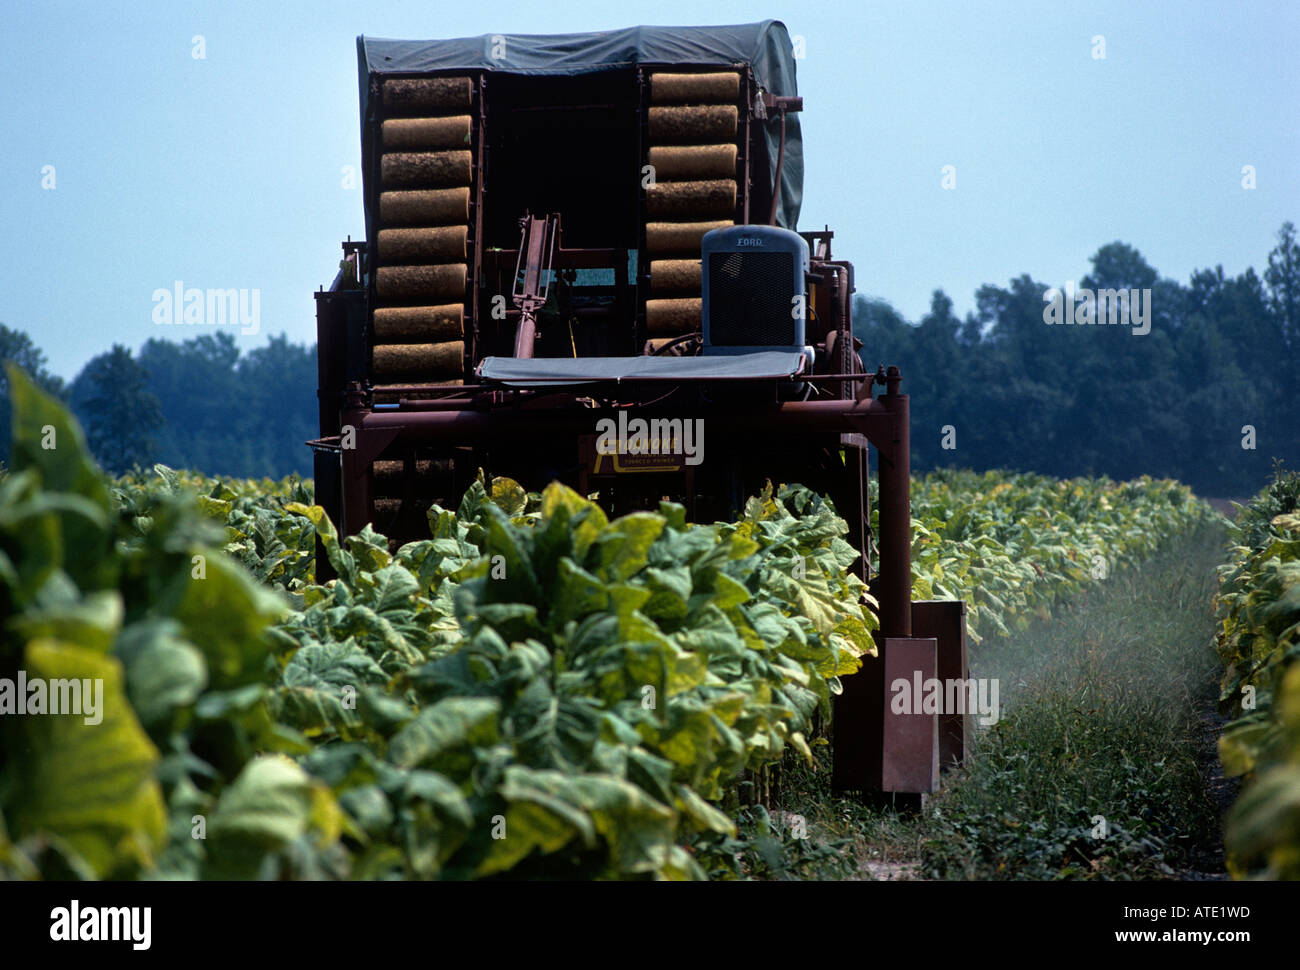 LANDSCAPE OF HARVESTER COLLECTING TOBACCO LEAVES FROM FIELDS ON SOUTHERN PLANTATION GEORGIA USA Stock Photo